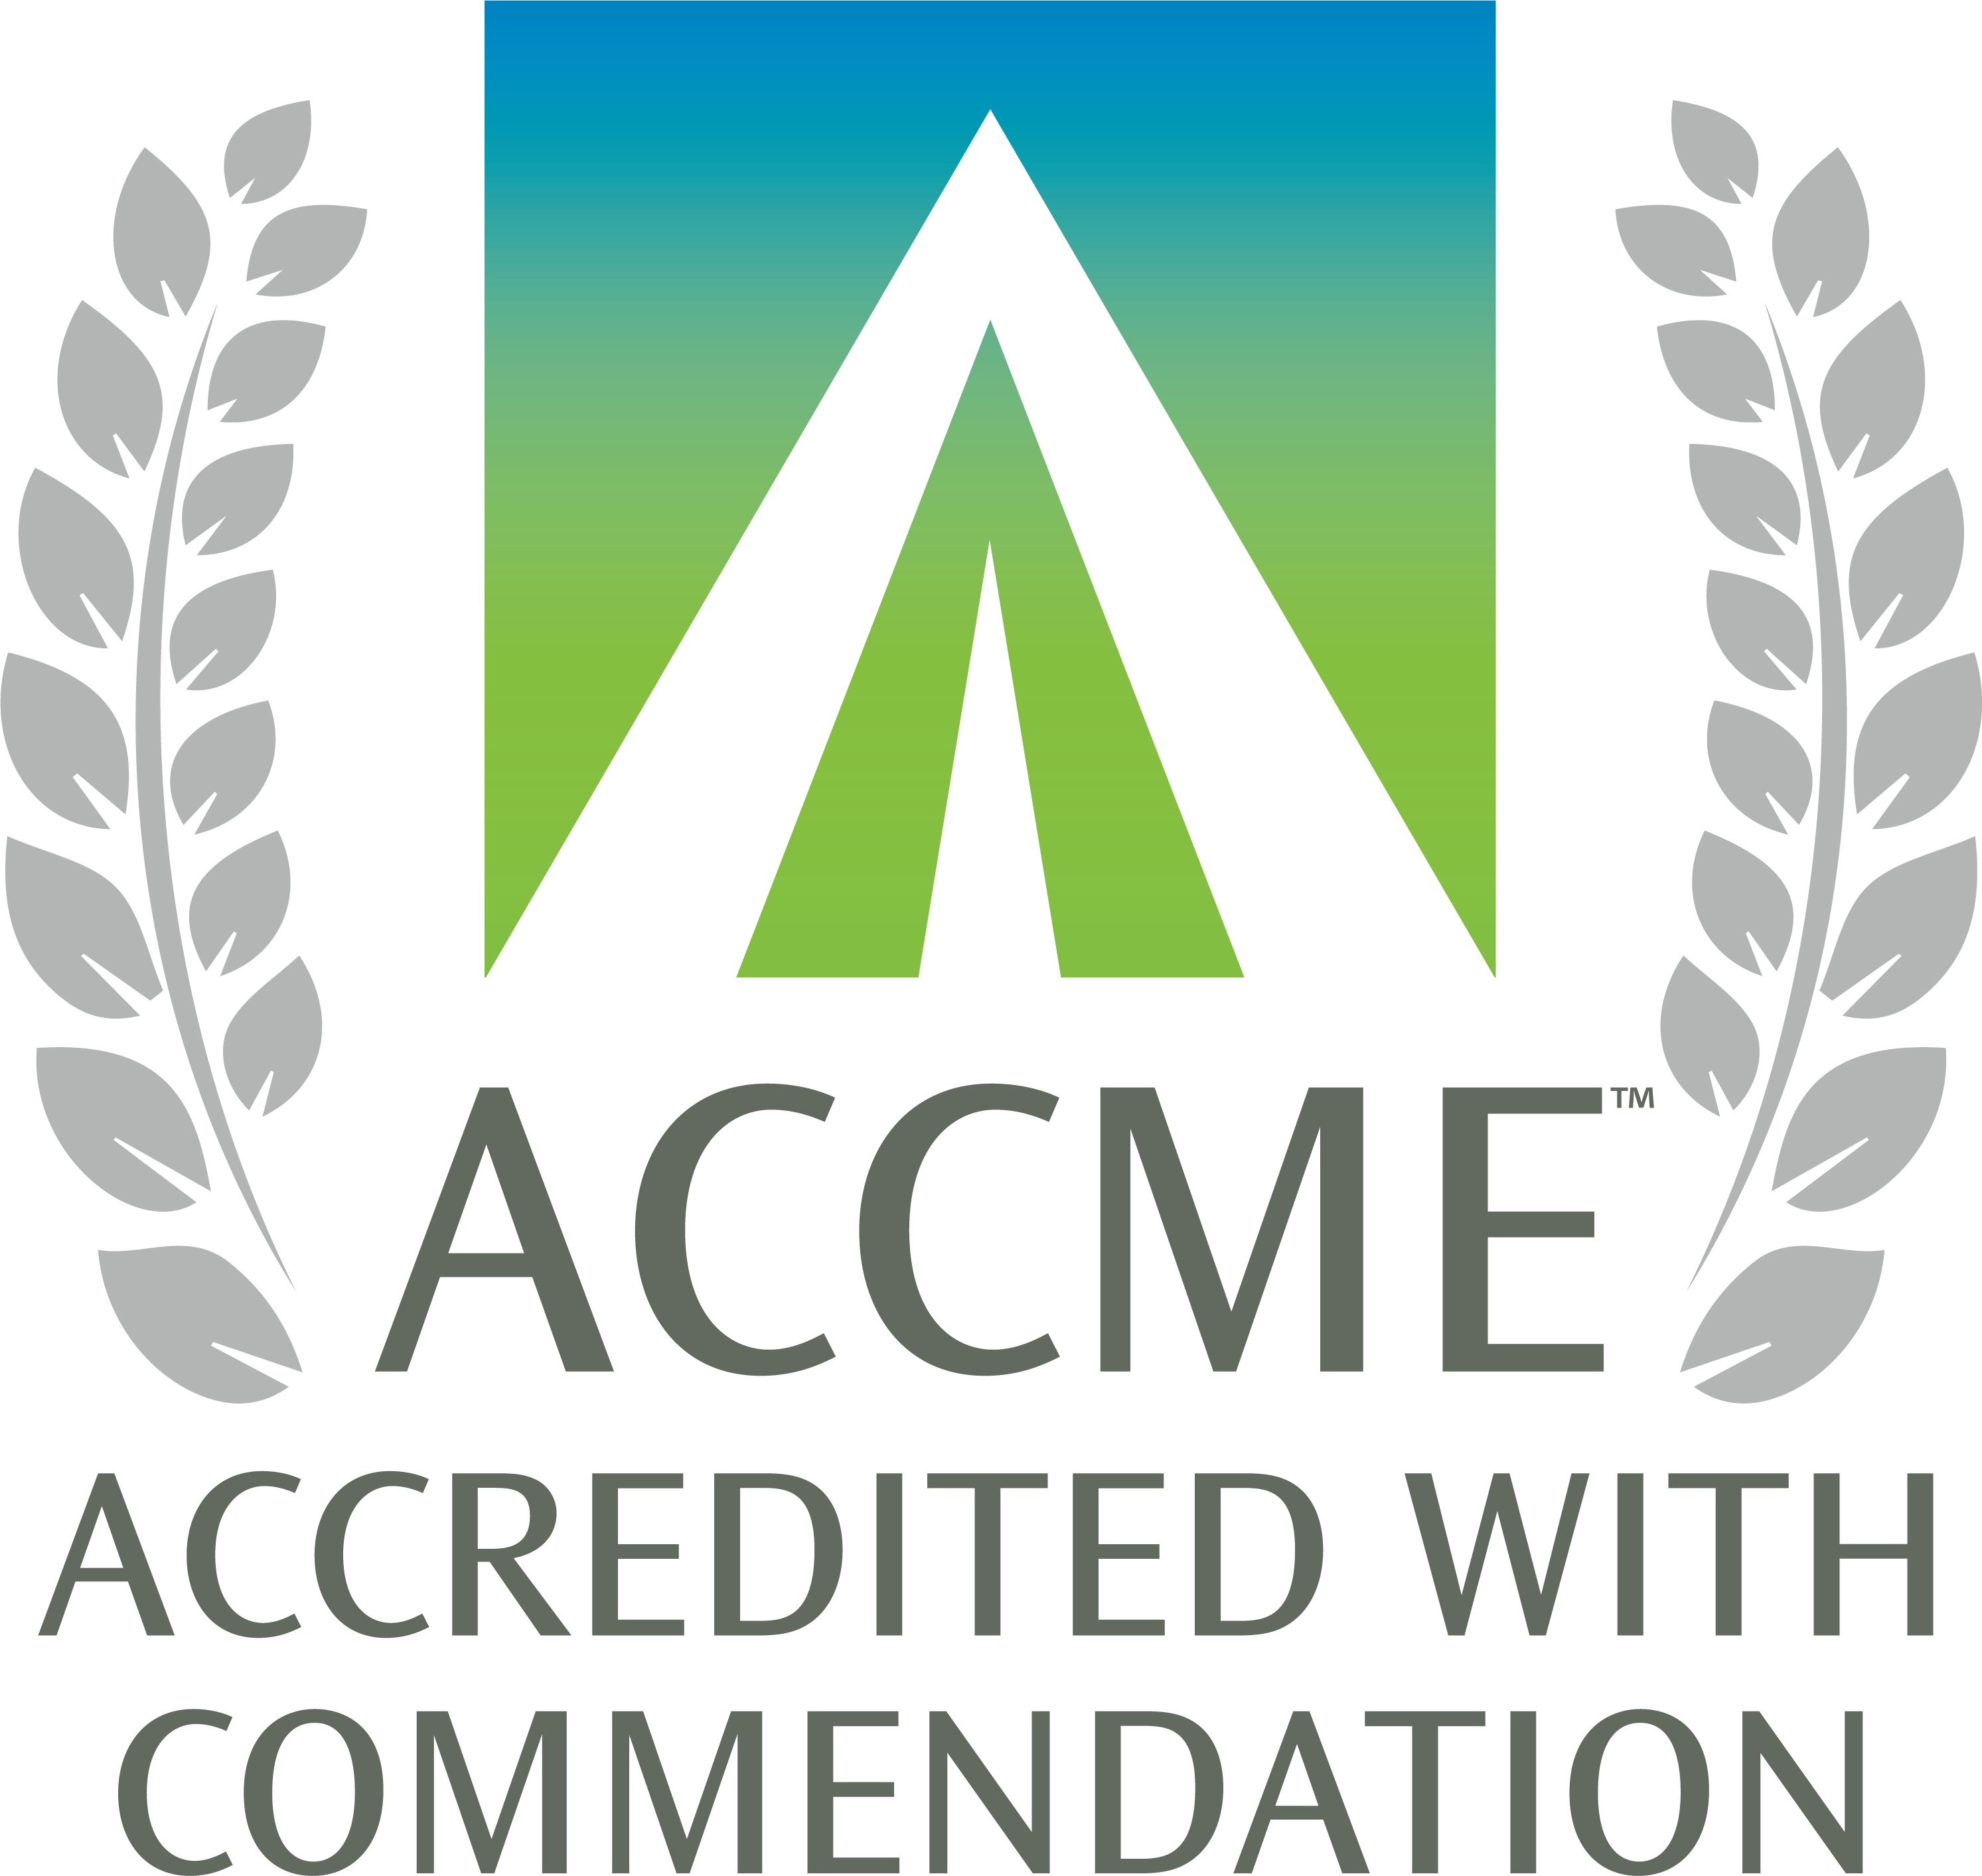 accme-commendation-full-color.png